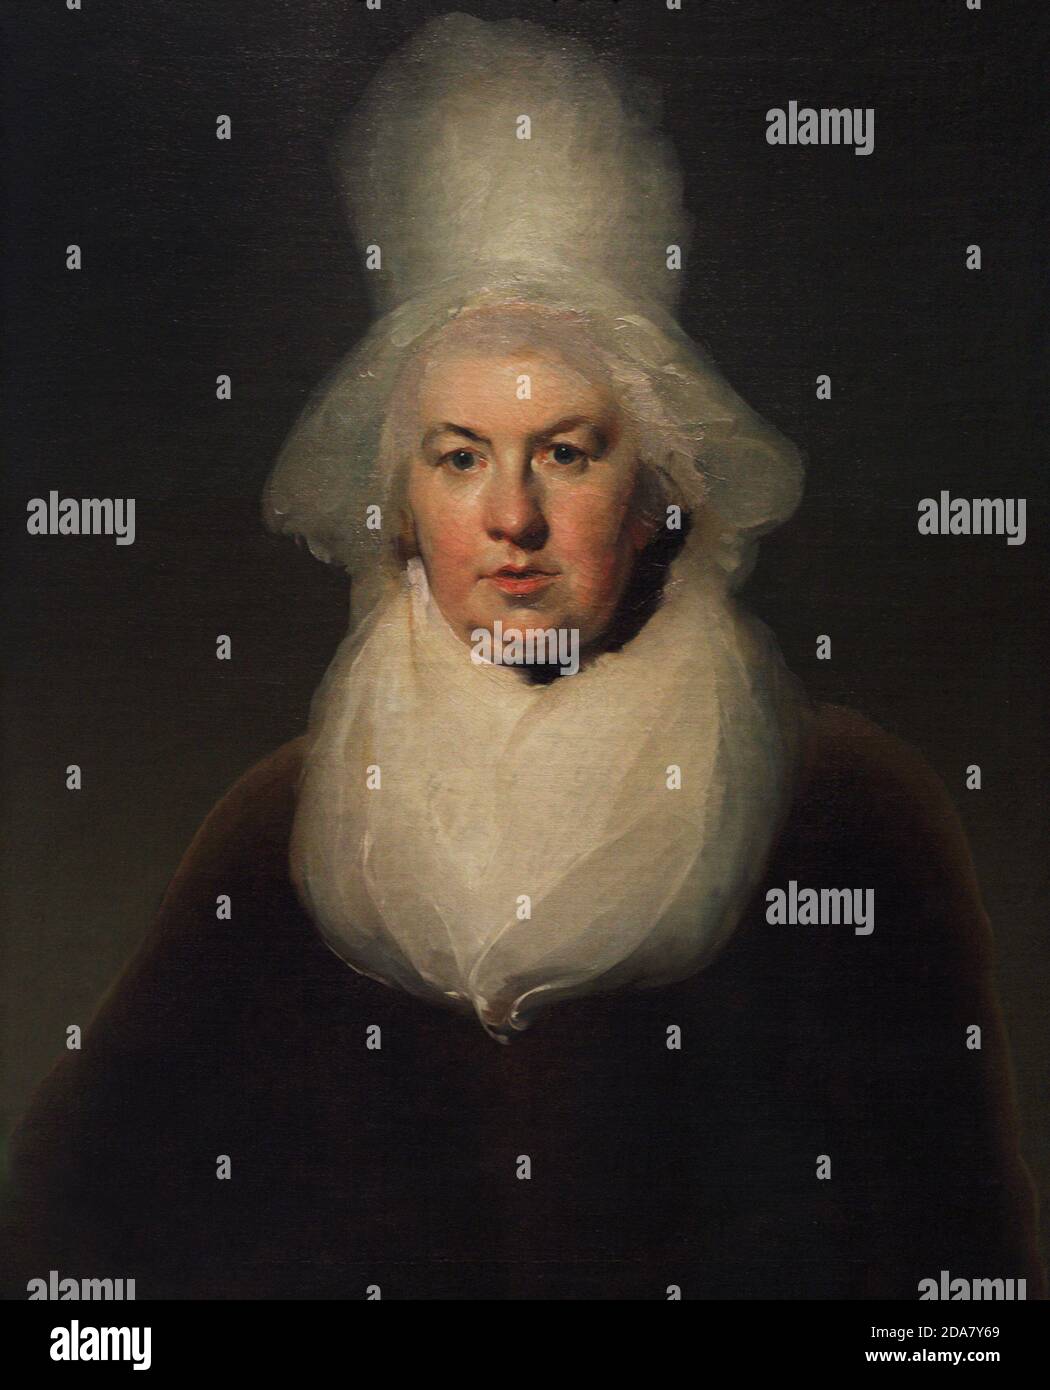 Sarah Trimmer (1741-1819). Writer and critic of 18th century British children's literature, as well as an educational reformer. Portrait by Sir Thomas Lawrence (1769-1830). Oil on canvas (76,2 x 63,5 cm), c. 1790. National Portrait Gallery. London, England, United Kingdom. Stock Photo